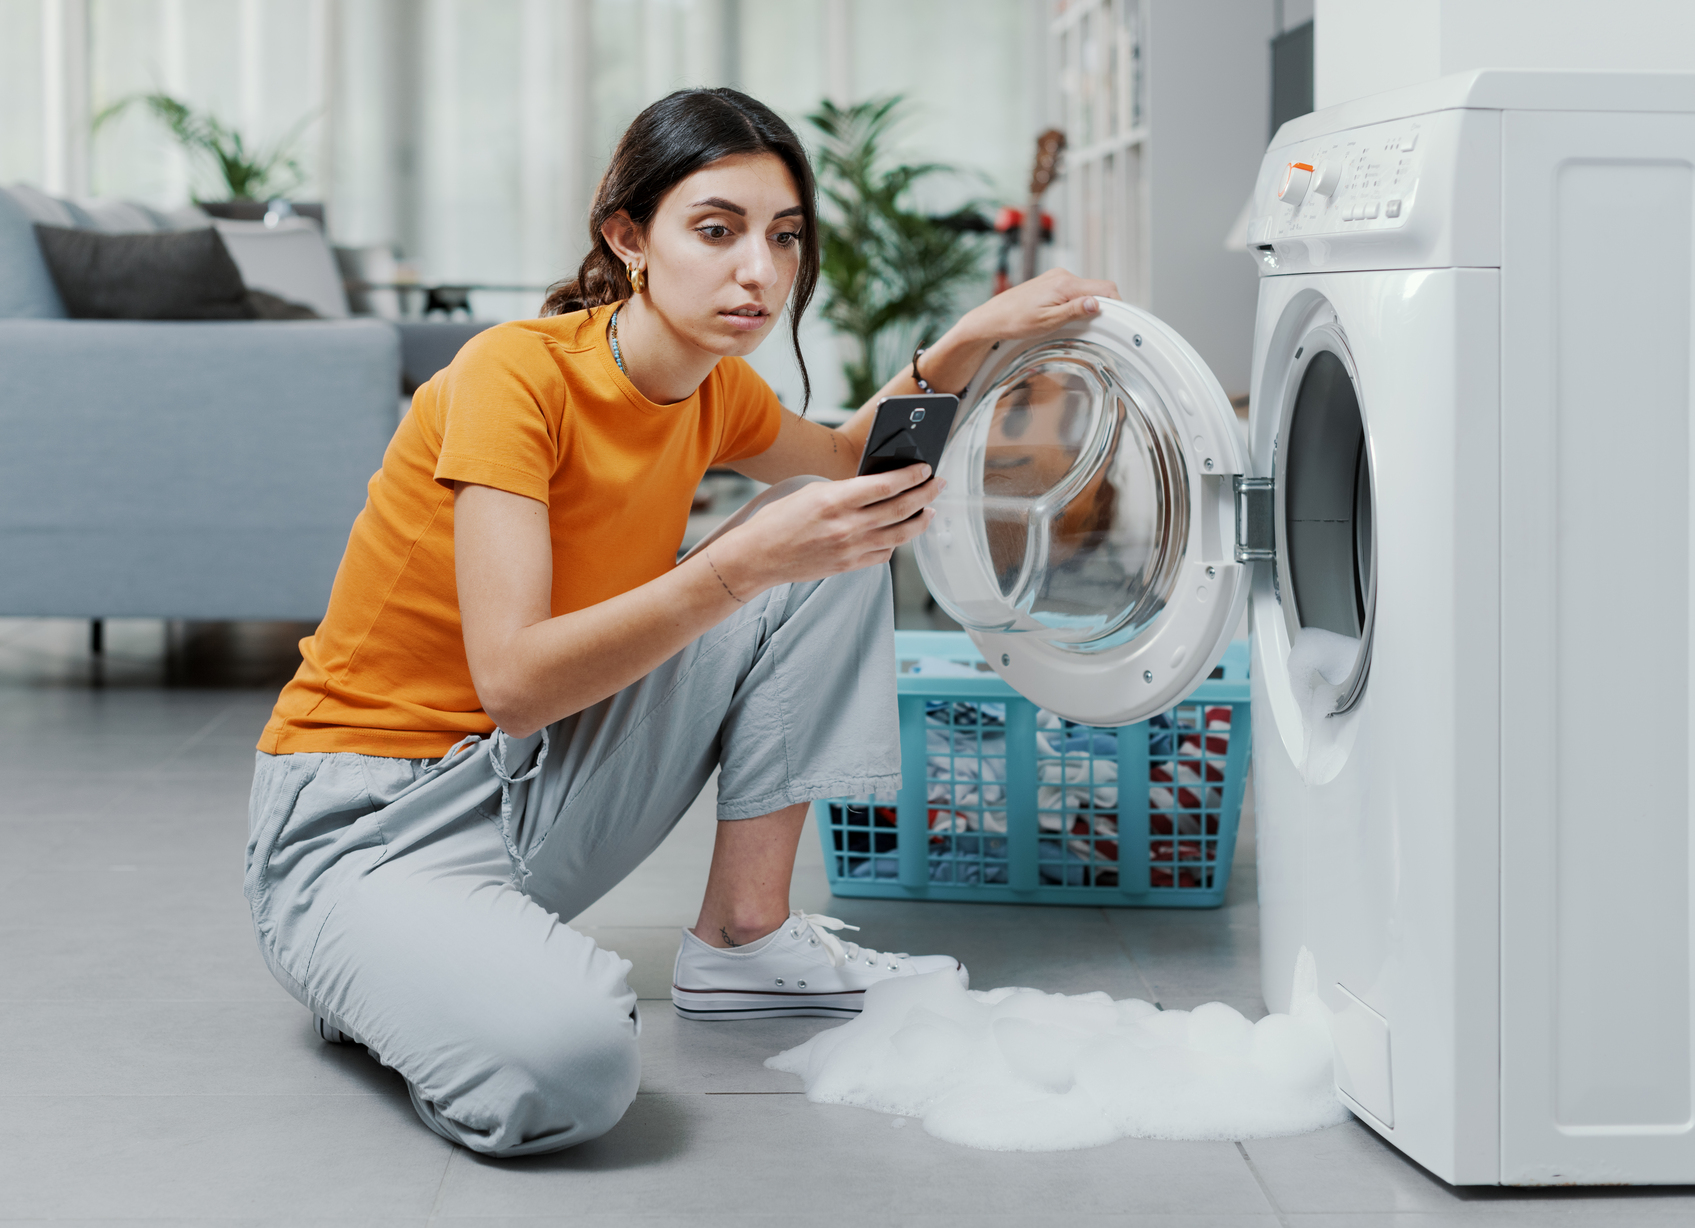 Woman looking at broken washing machine repair costs on her phone in her home